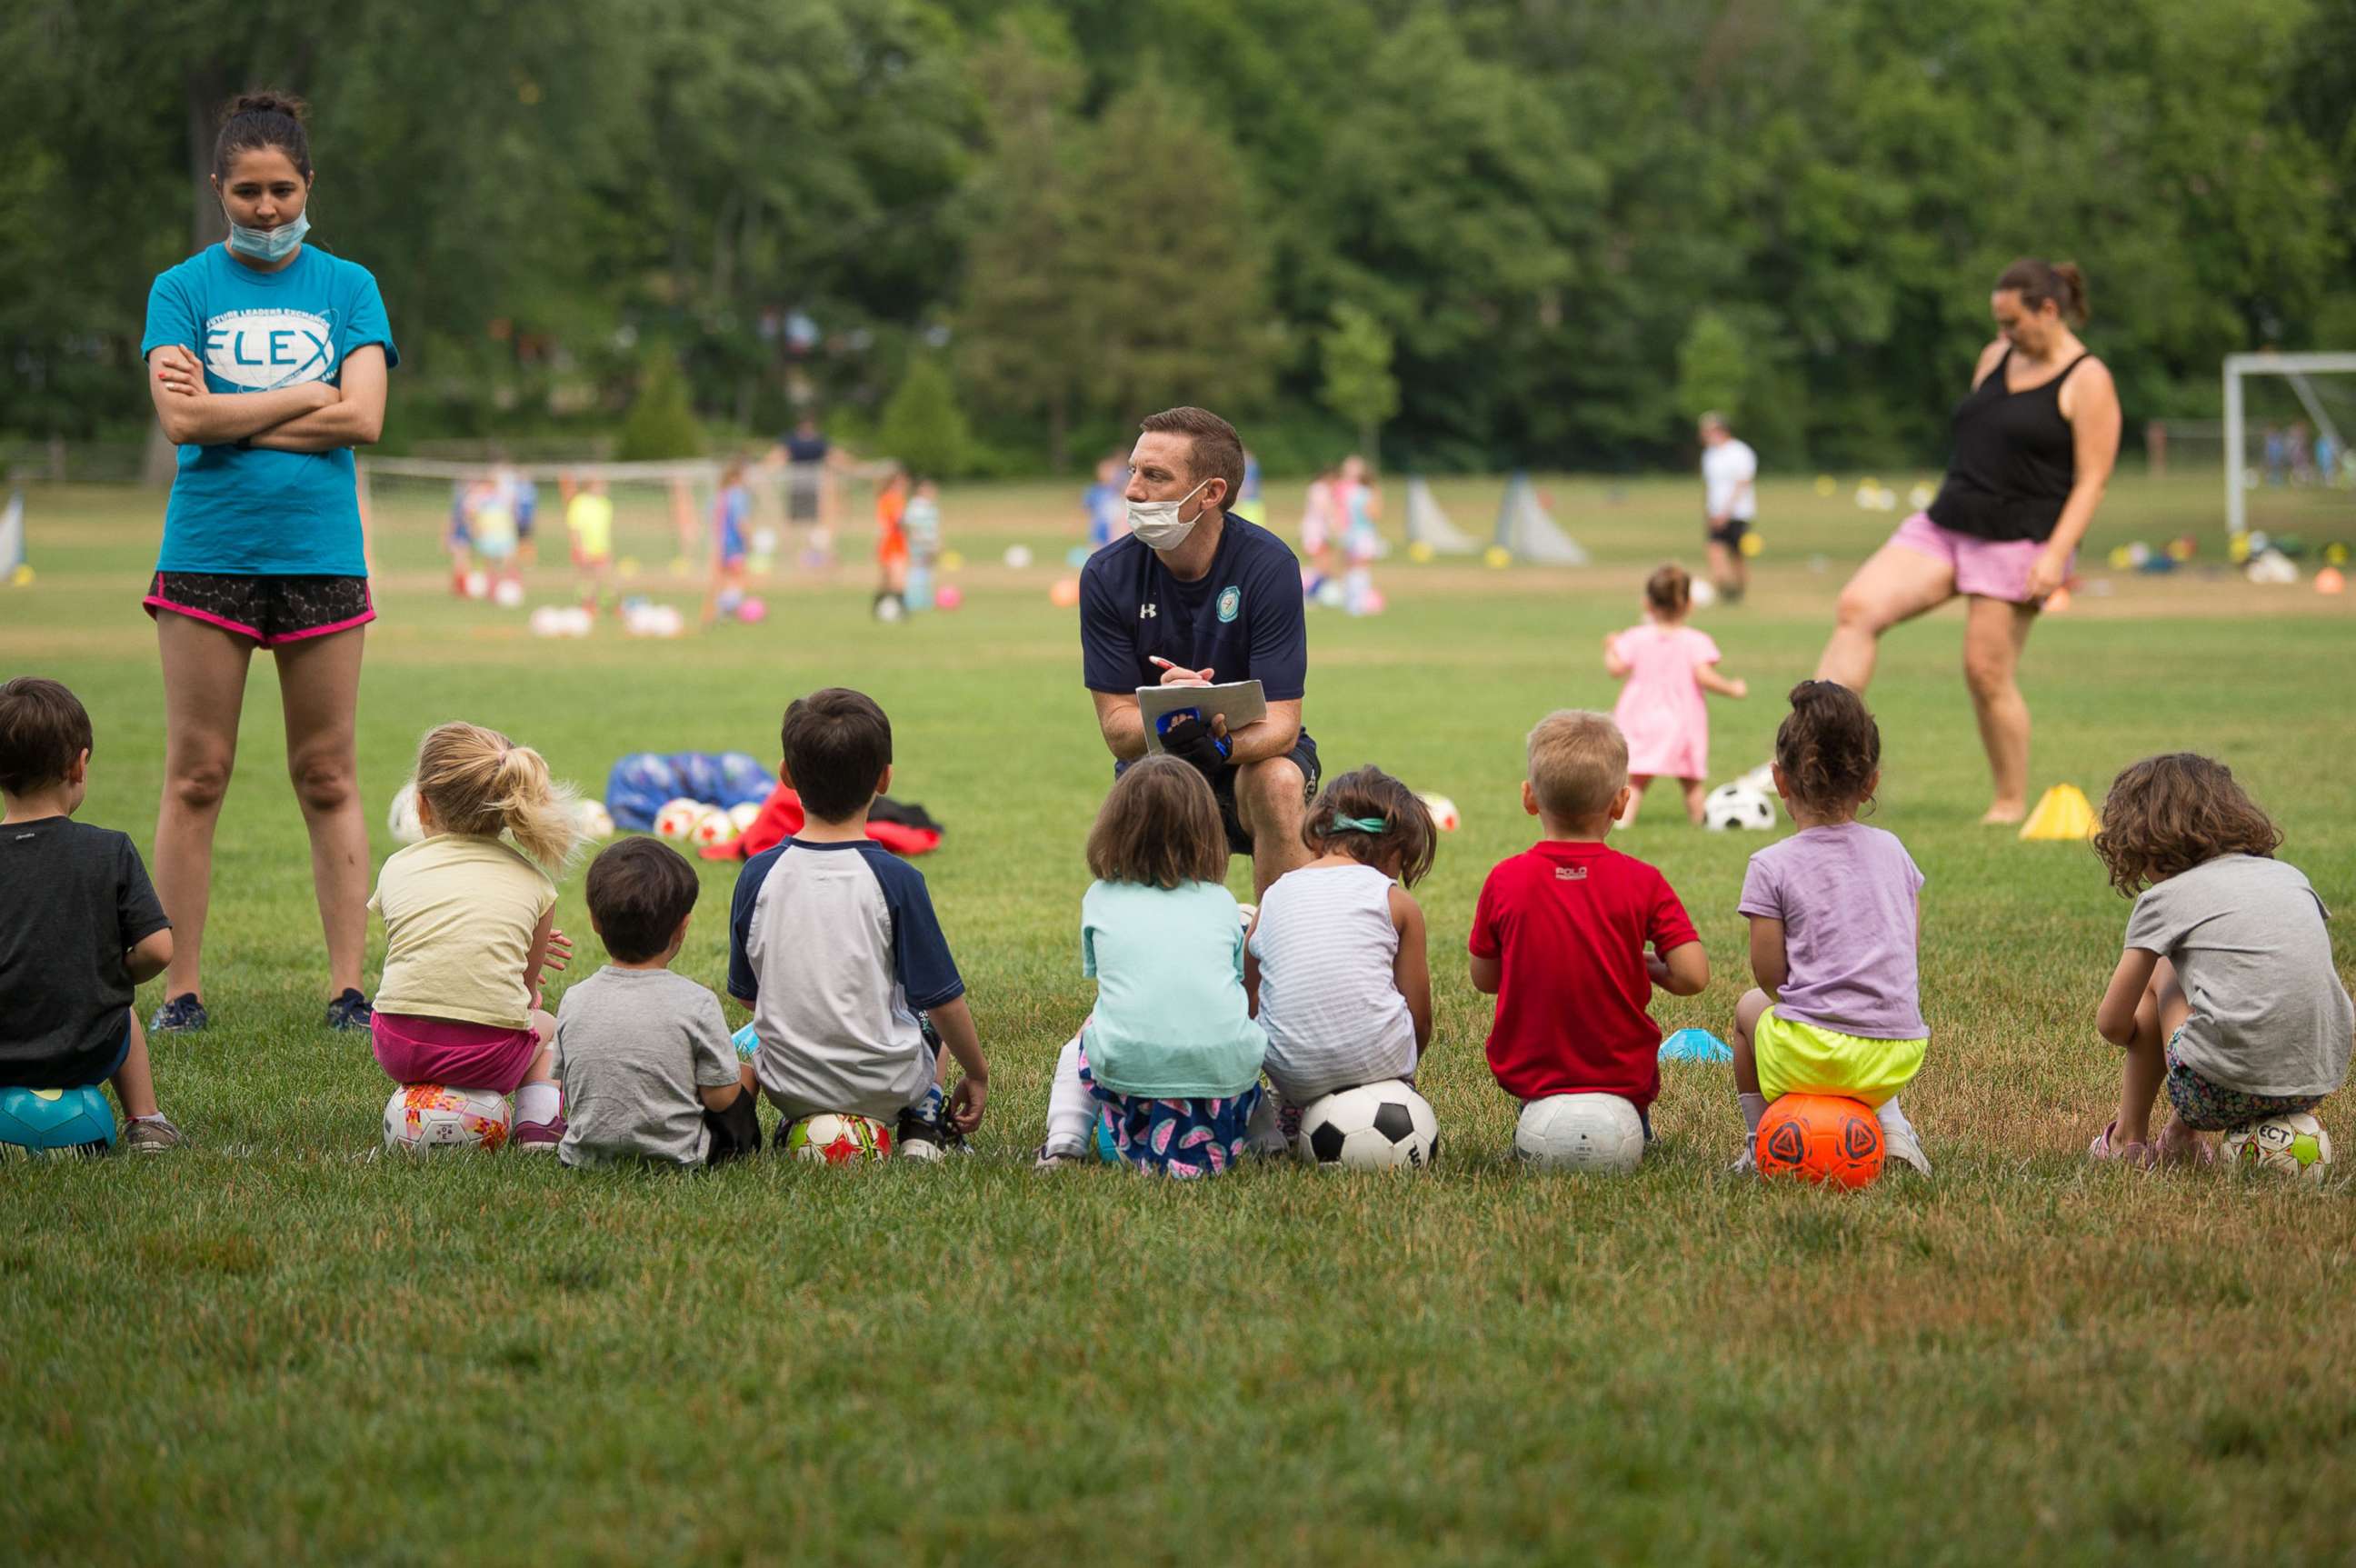 PHOTO: A coach wears a face masks during the opening of summer soccer camps in Darien, Conn., July 1, 2020.